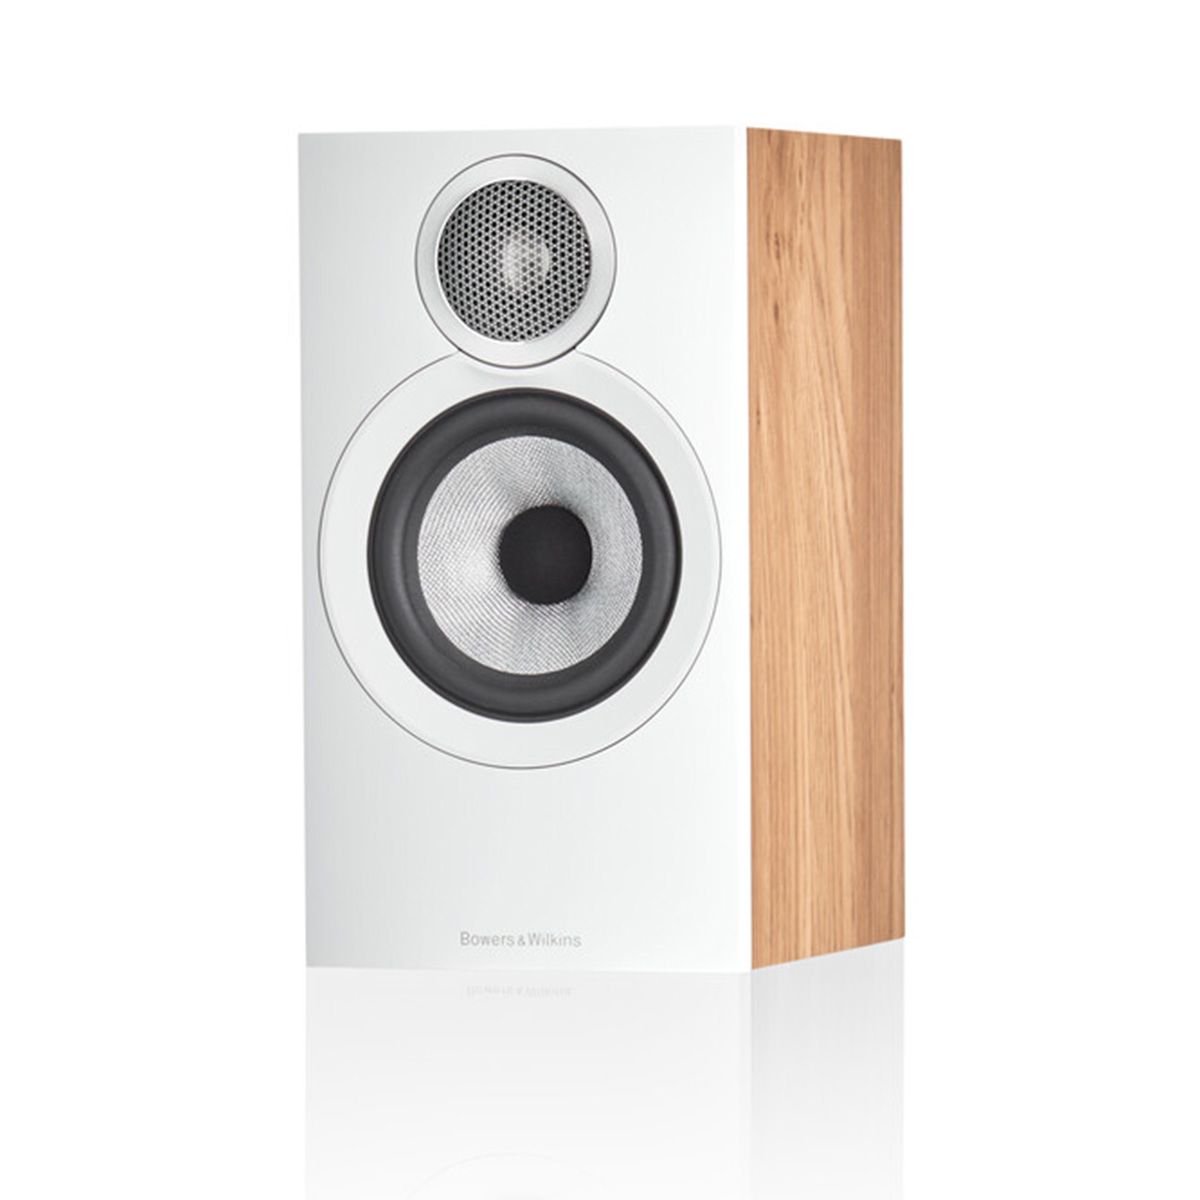 Bowers & Wilkins 607 S3 Bookshelf speaker in oak at an angle without grille